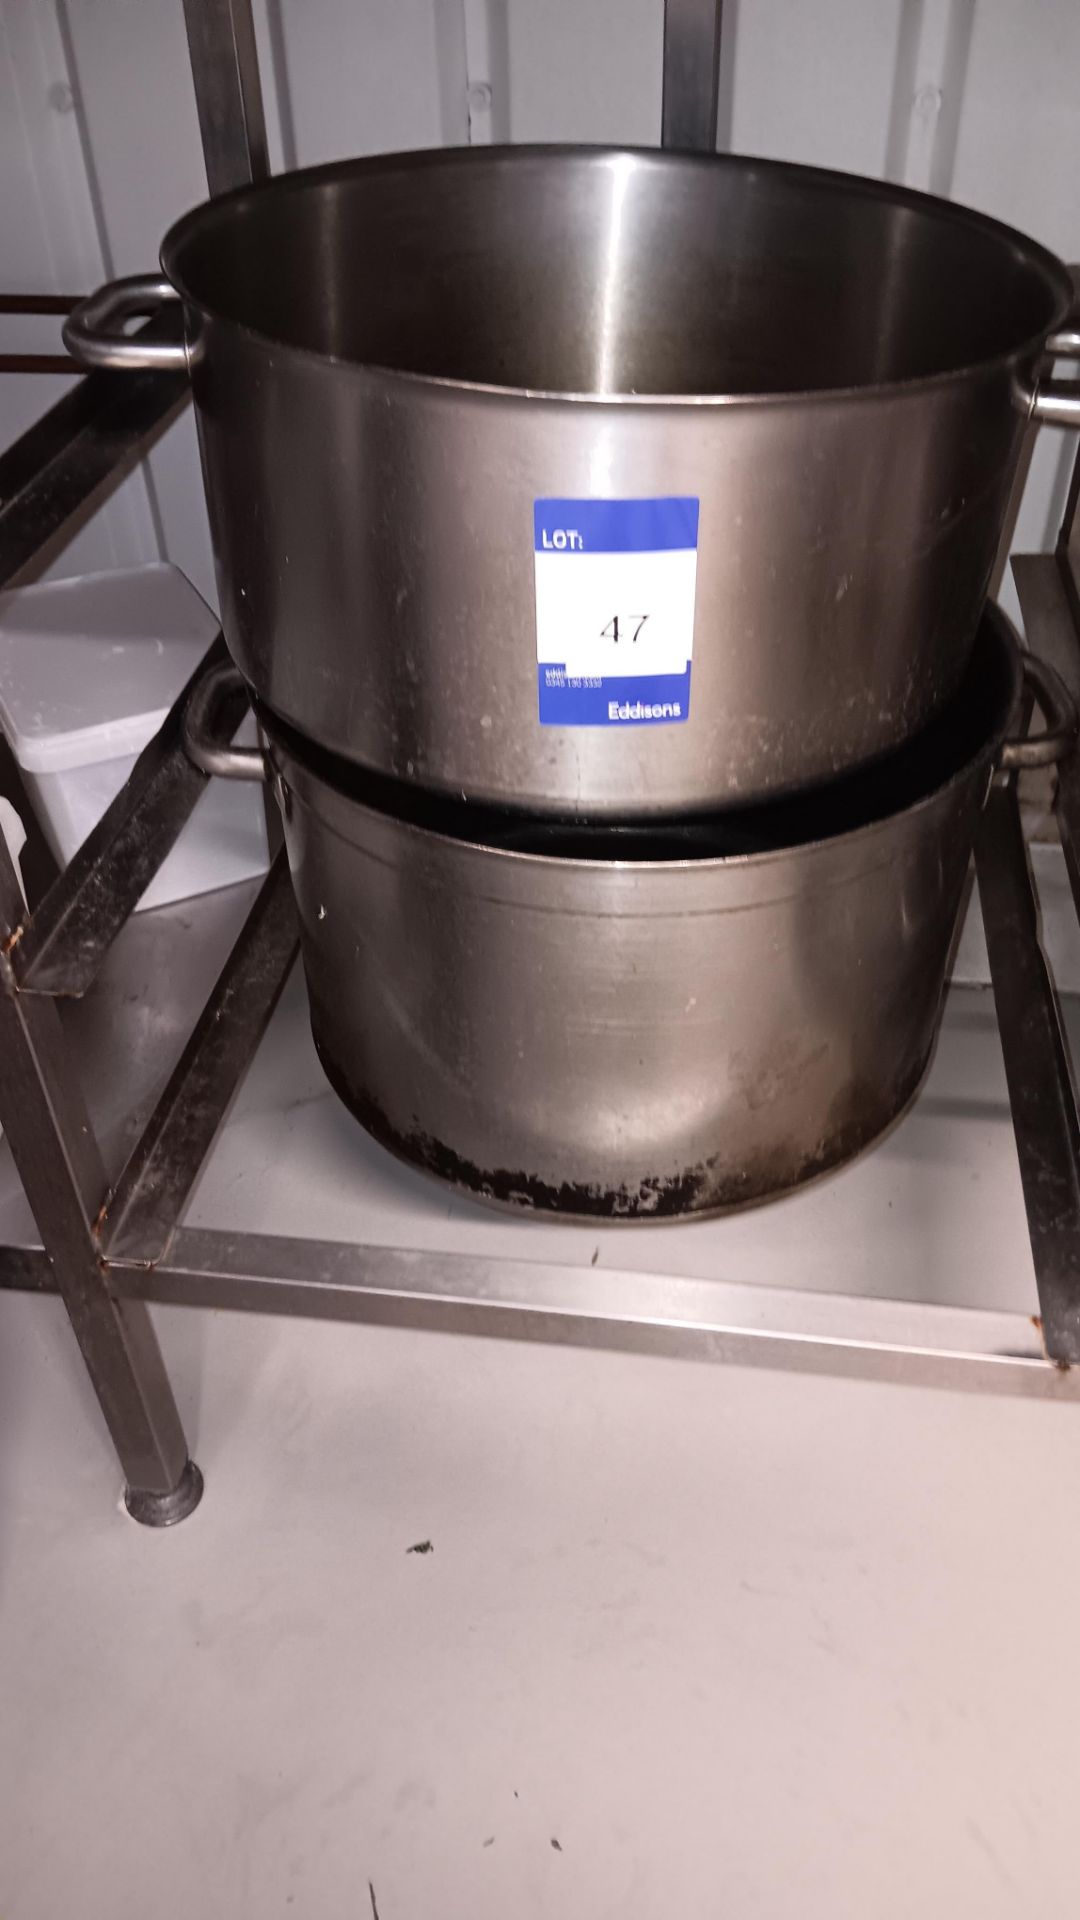 2 x Stainless steel stock pots